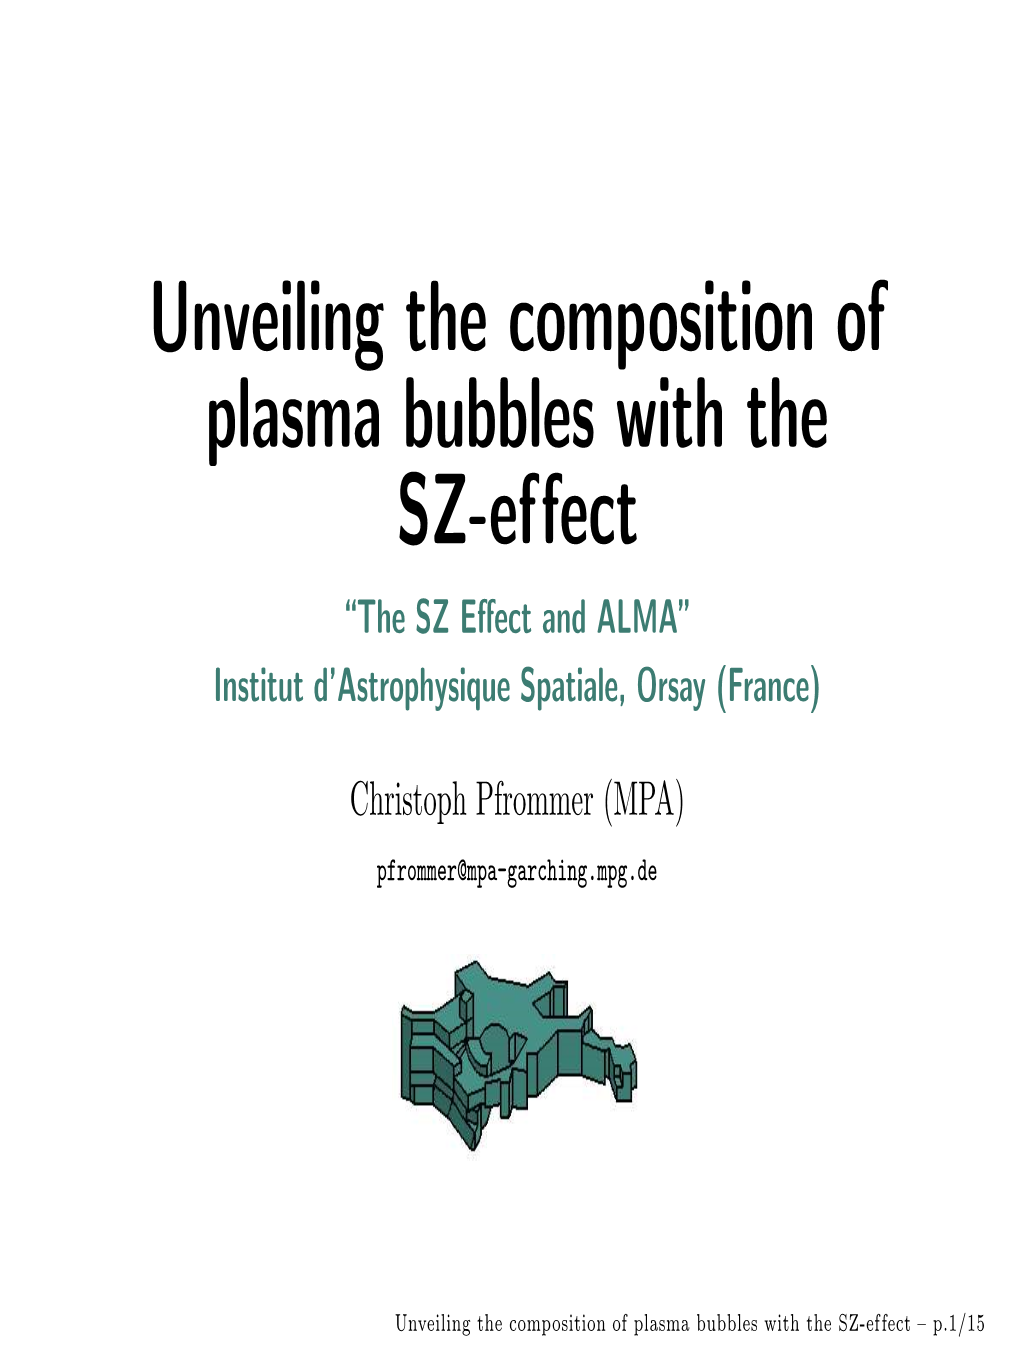 Unveiling the Composition of Plasma Bubbles with the SZ-Effect “The SZ Eﬀect and ALMA” Institut D’Astrophysique Spatiale, Orsay (France)